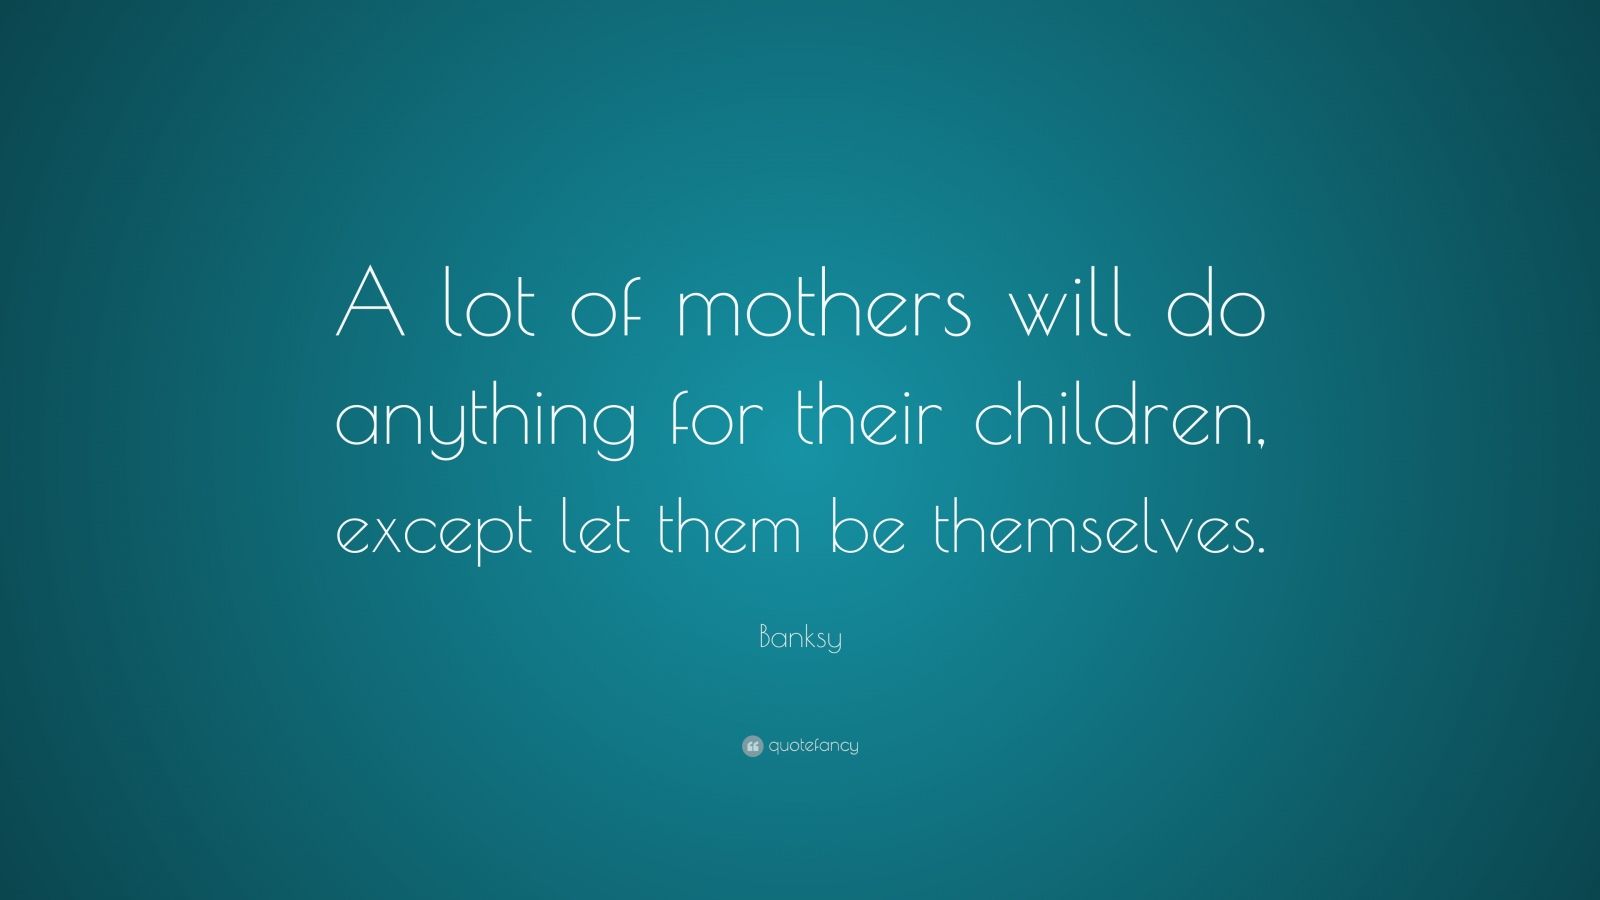 Banksy Quote: “A lot of mothers will do anything for their children ...